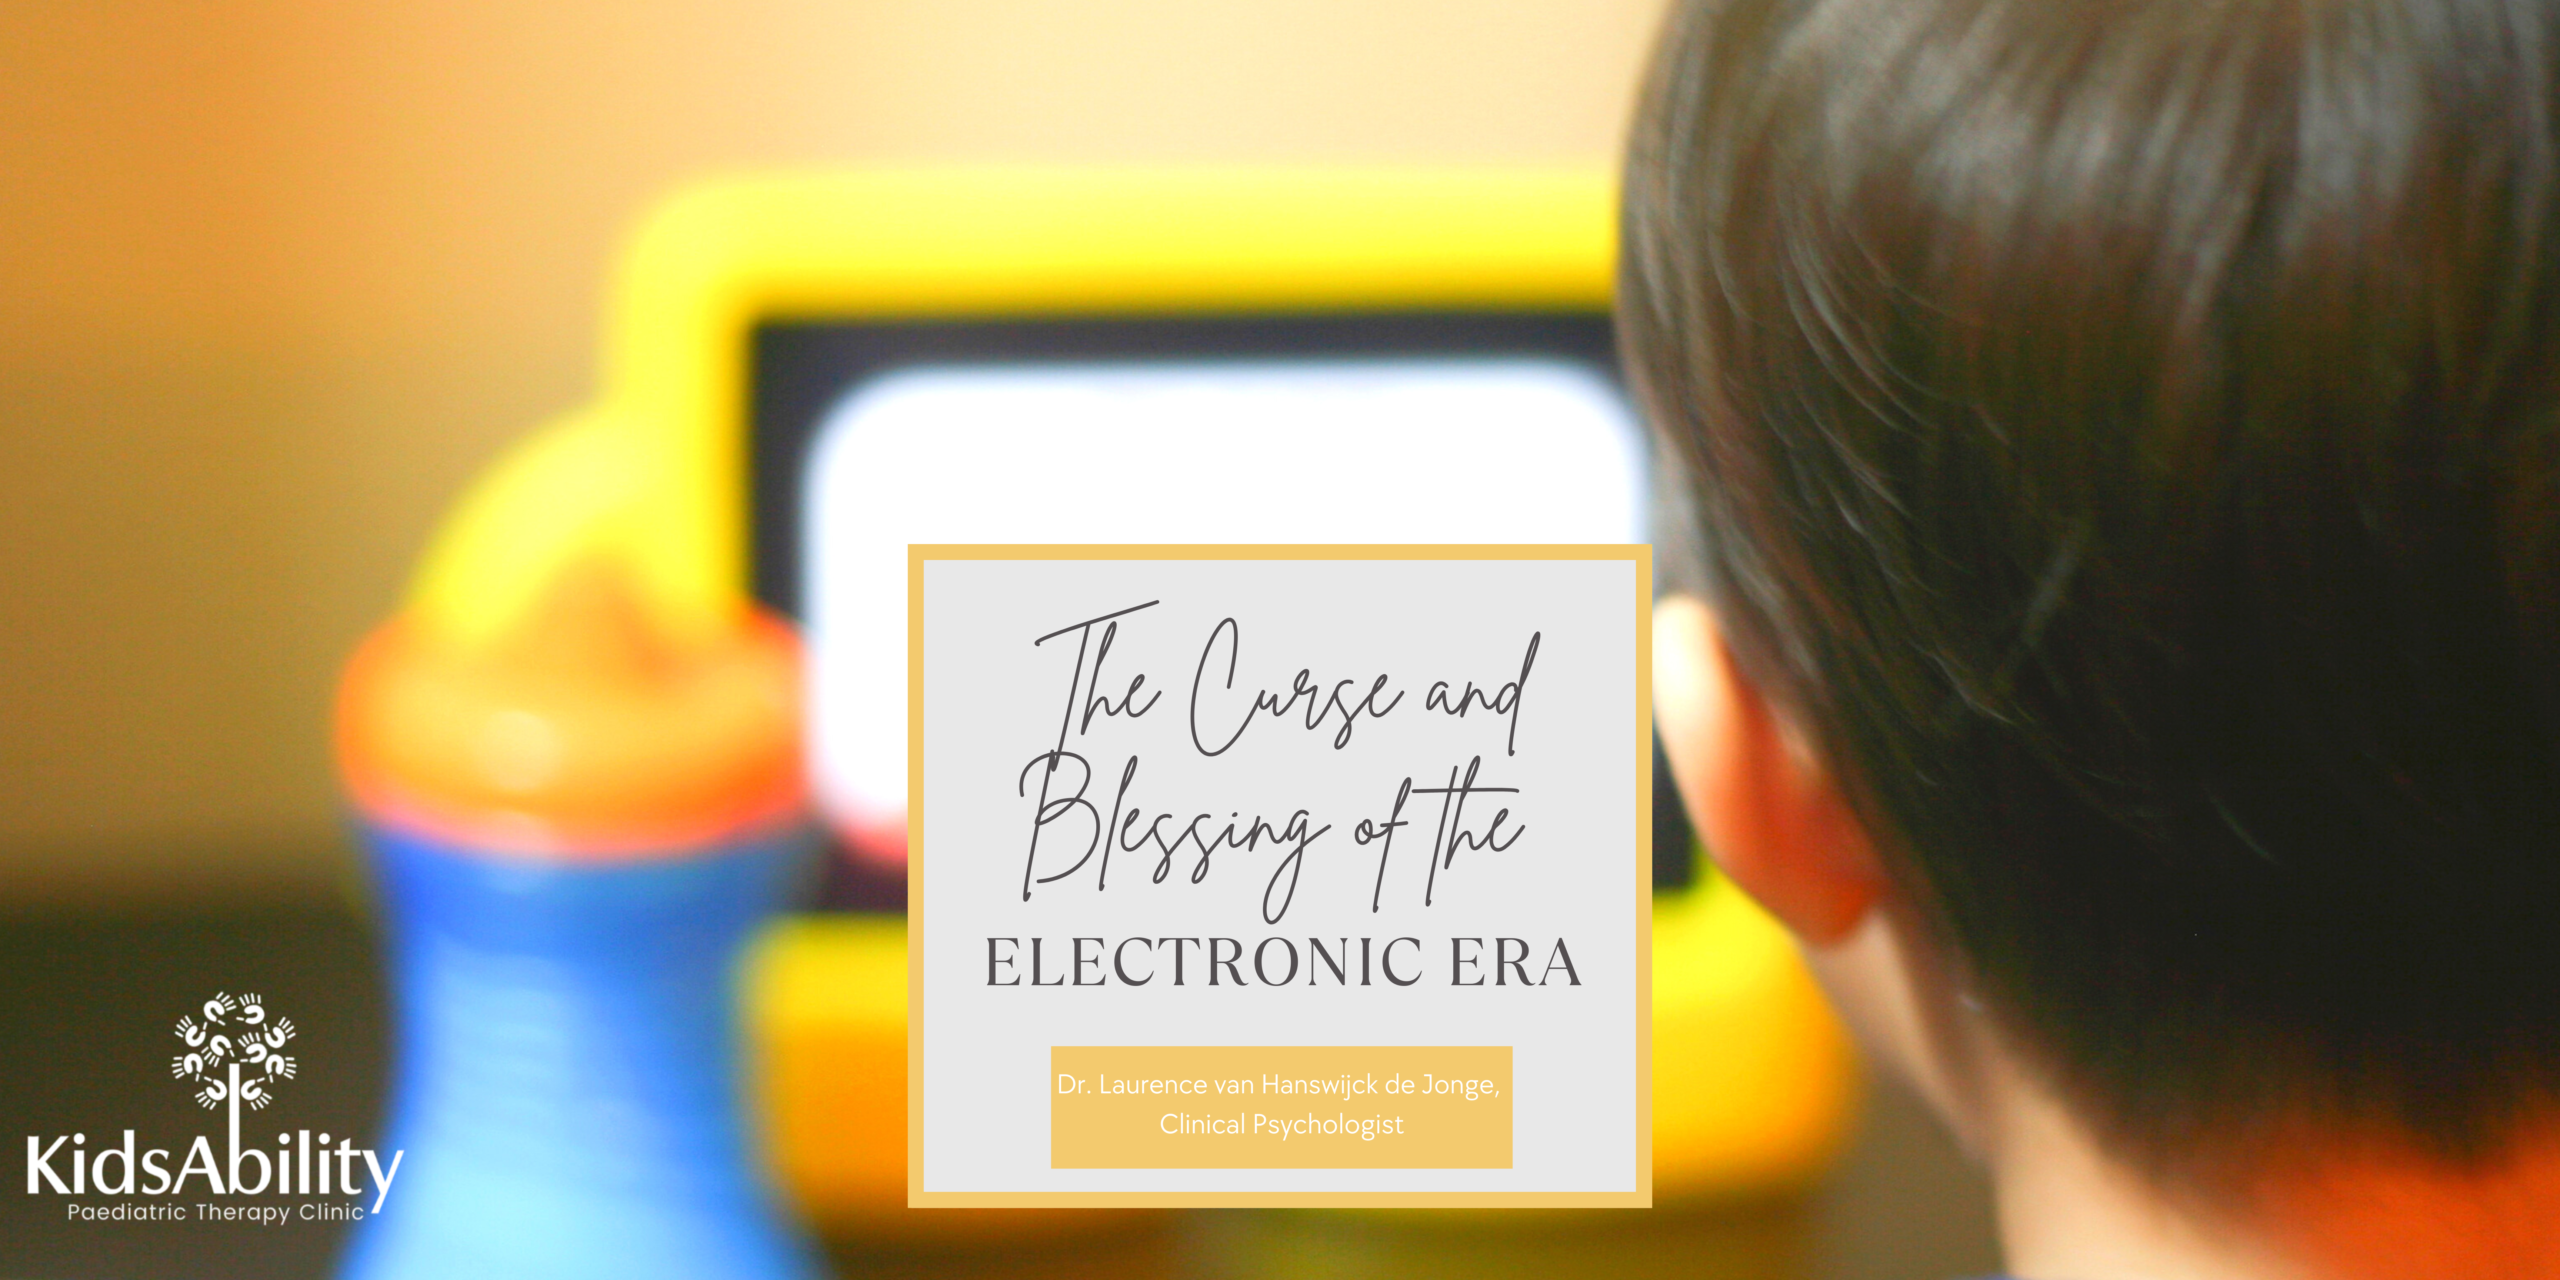 THE CURSE AND BLESSING OF THE ELECTRONIC ERA: HOW TO SAFEGUARD OUR CHILDREN AND SET HEALTHY BOUNDARIES